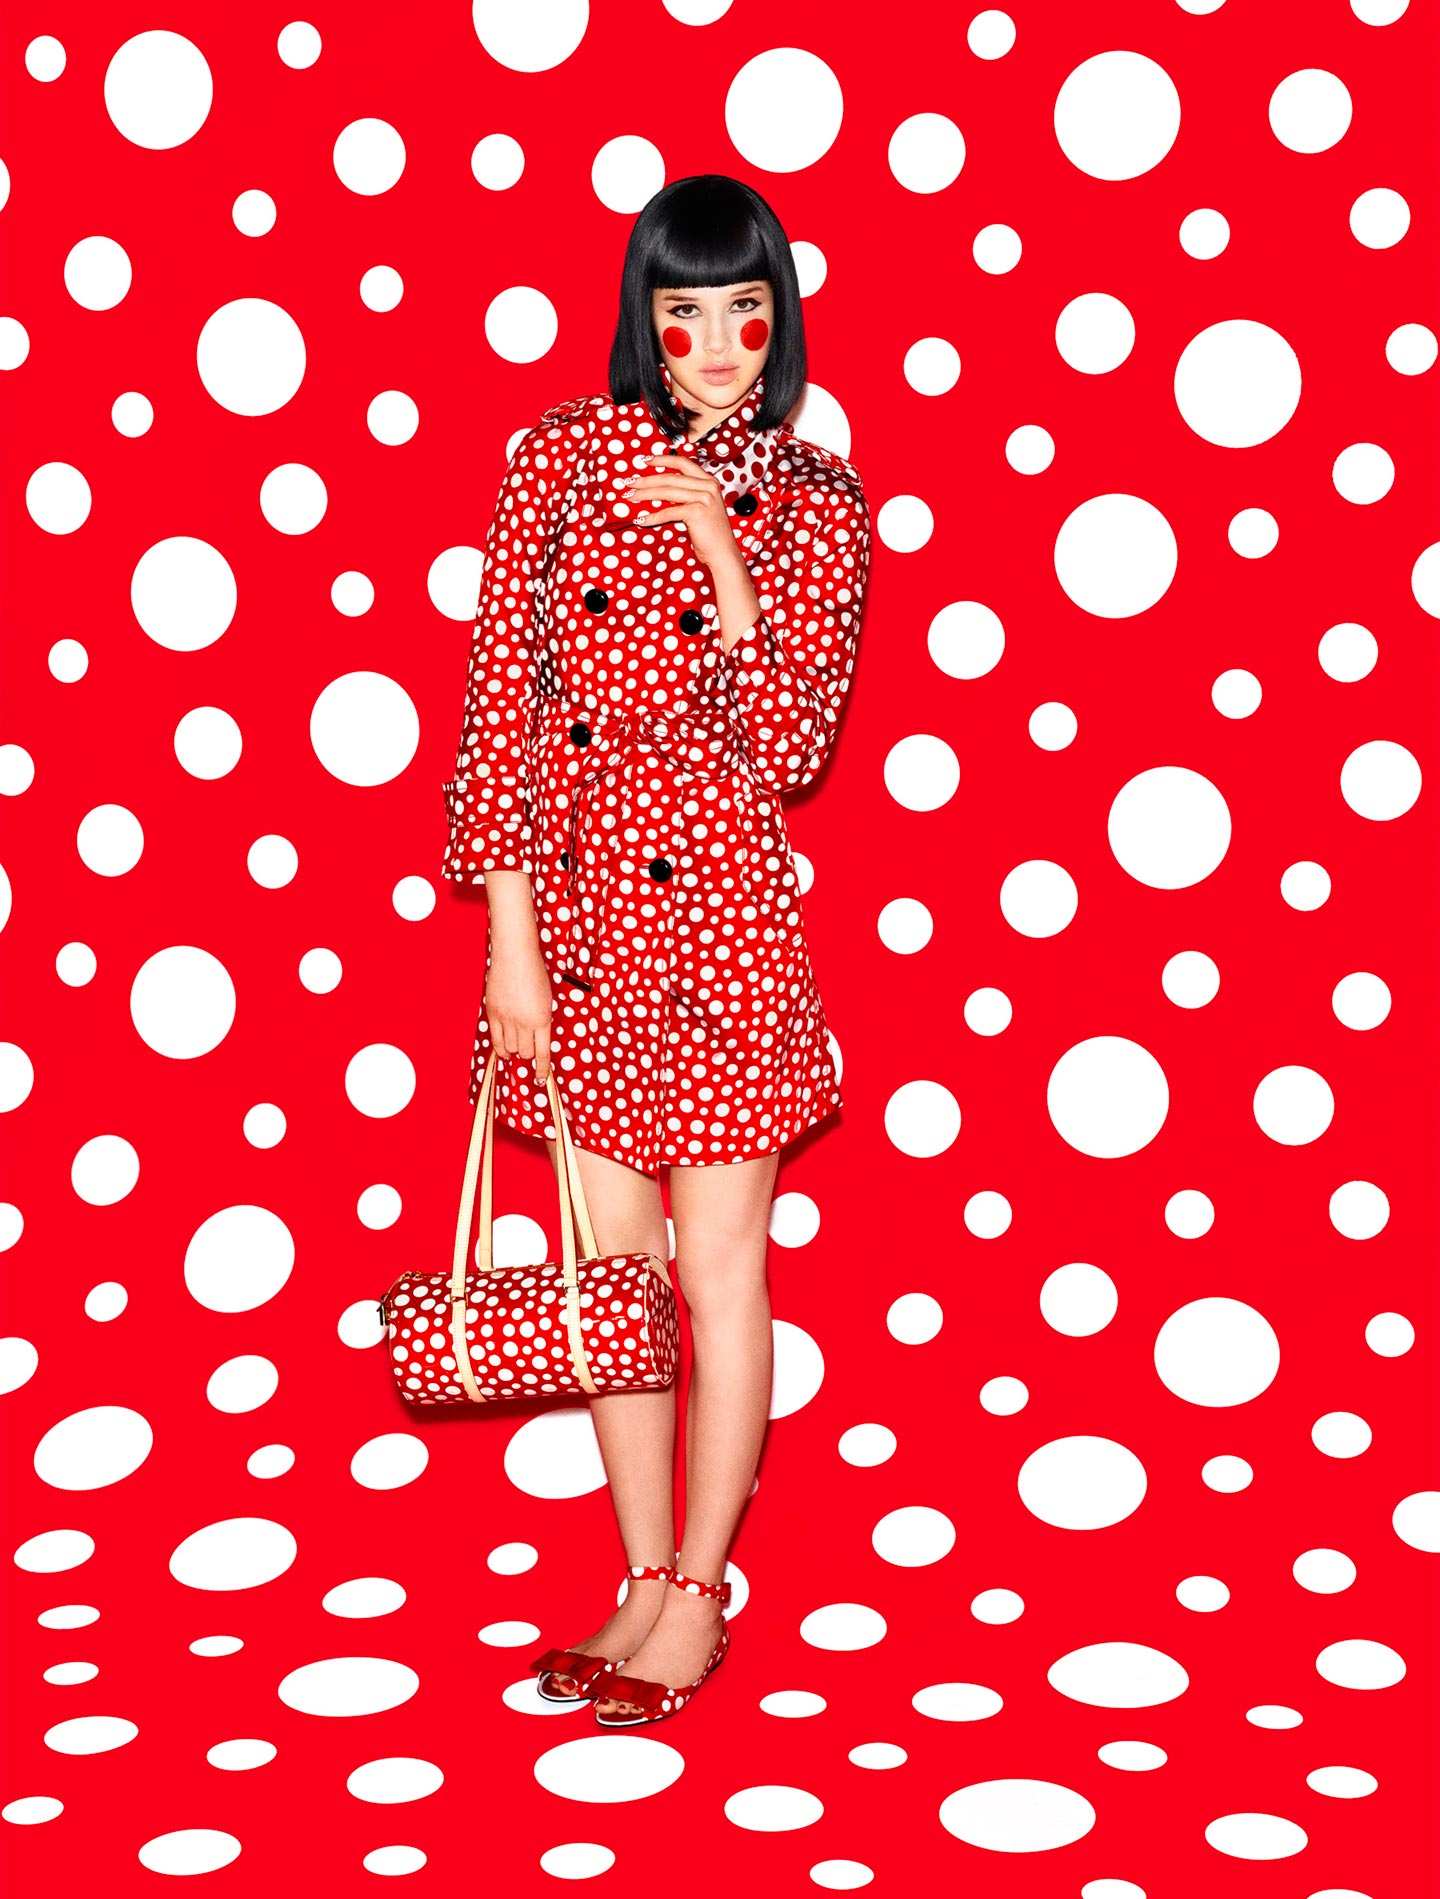 Fans of Louis Vuitton will remember the first Yayoi Kusama partnership from 2012 under the creative direction of Marc Jacobs